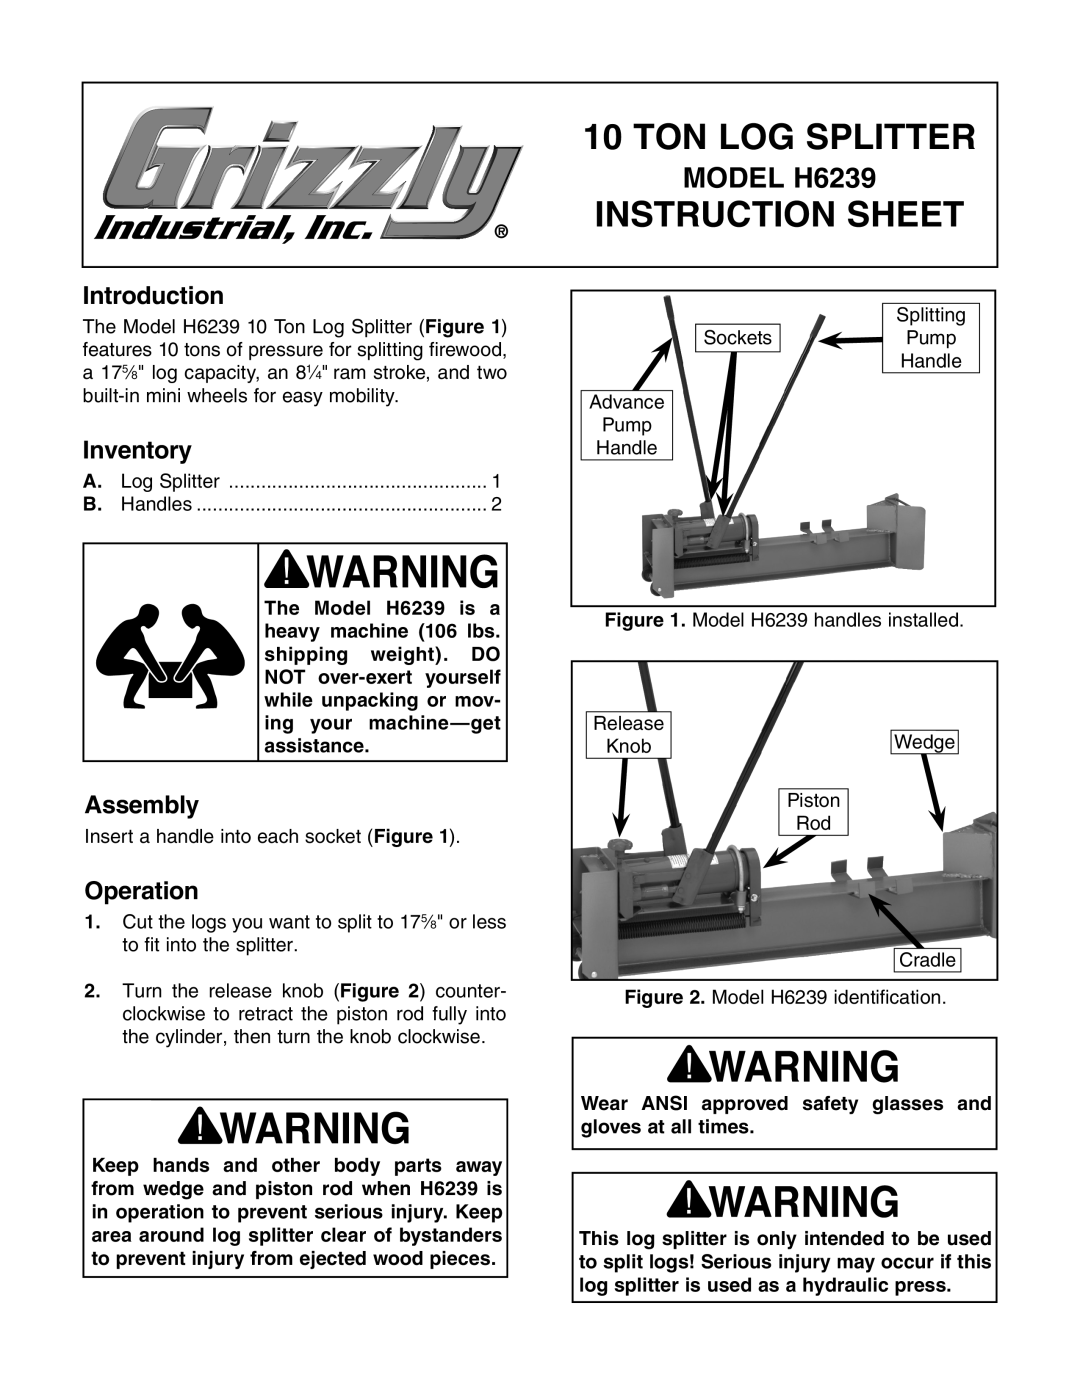 Grizzly instruction sheet Introduction, Inventory, Operation, Ton Log Splitter, Instruction Sheet, MODEL H6239 